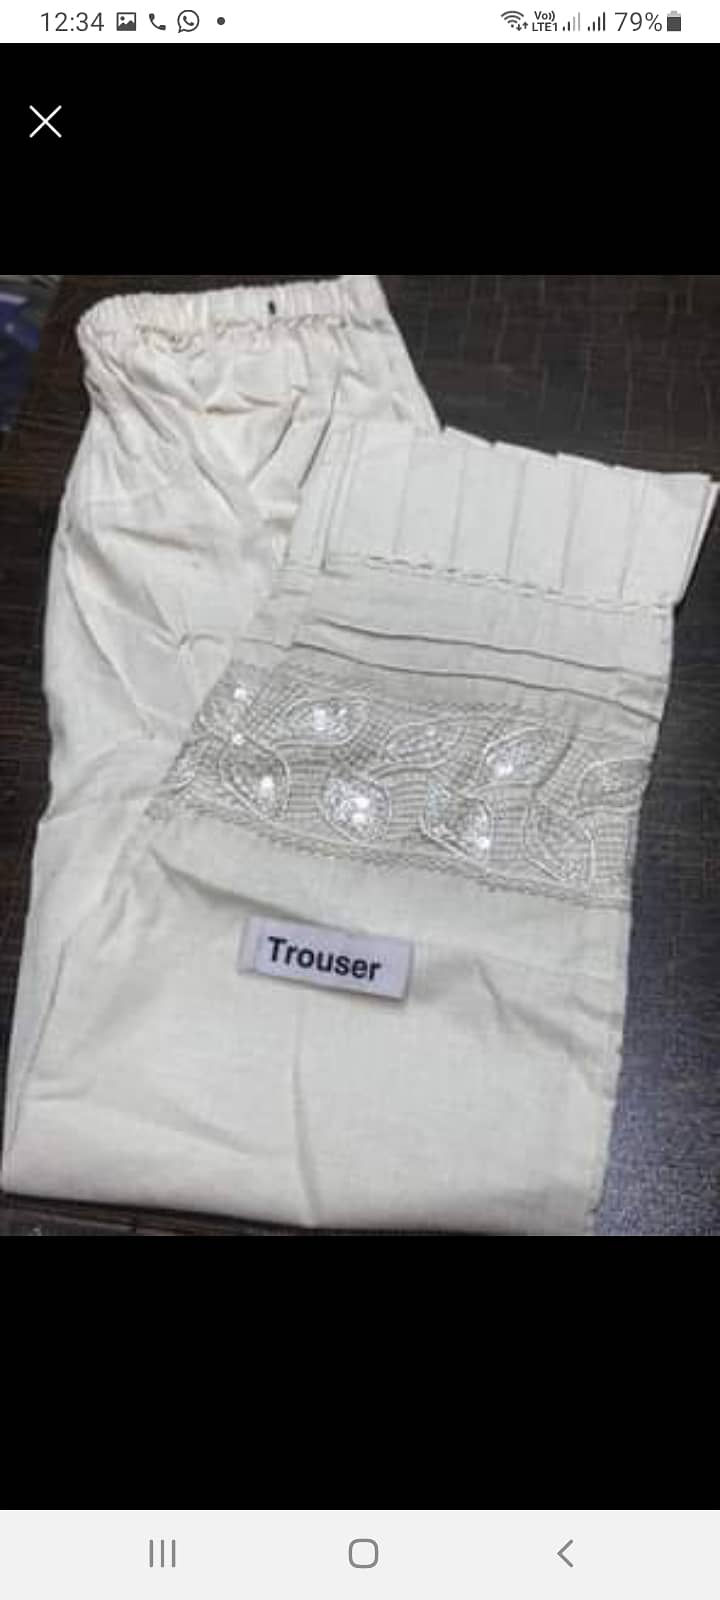 Trousers lady's 4